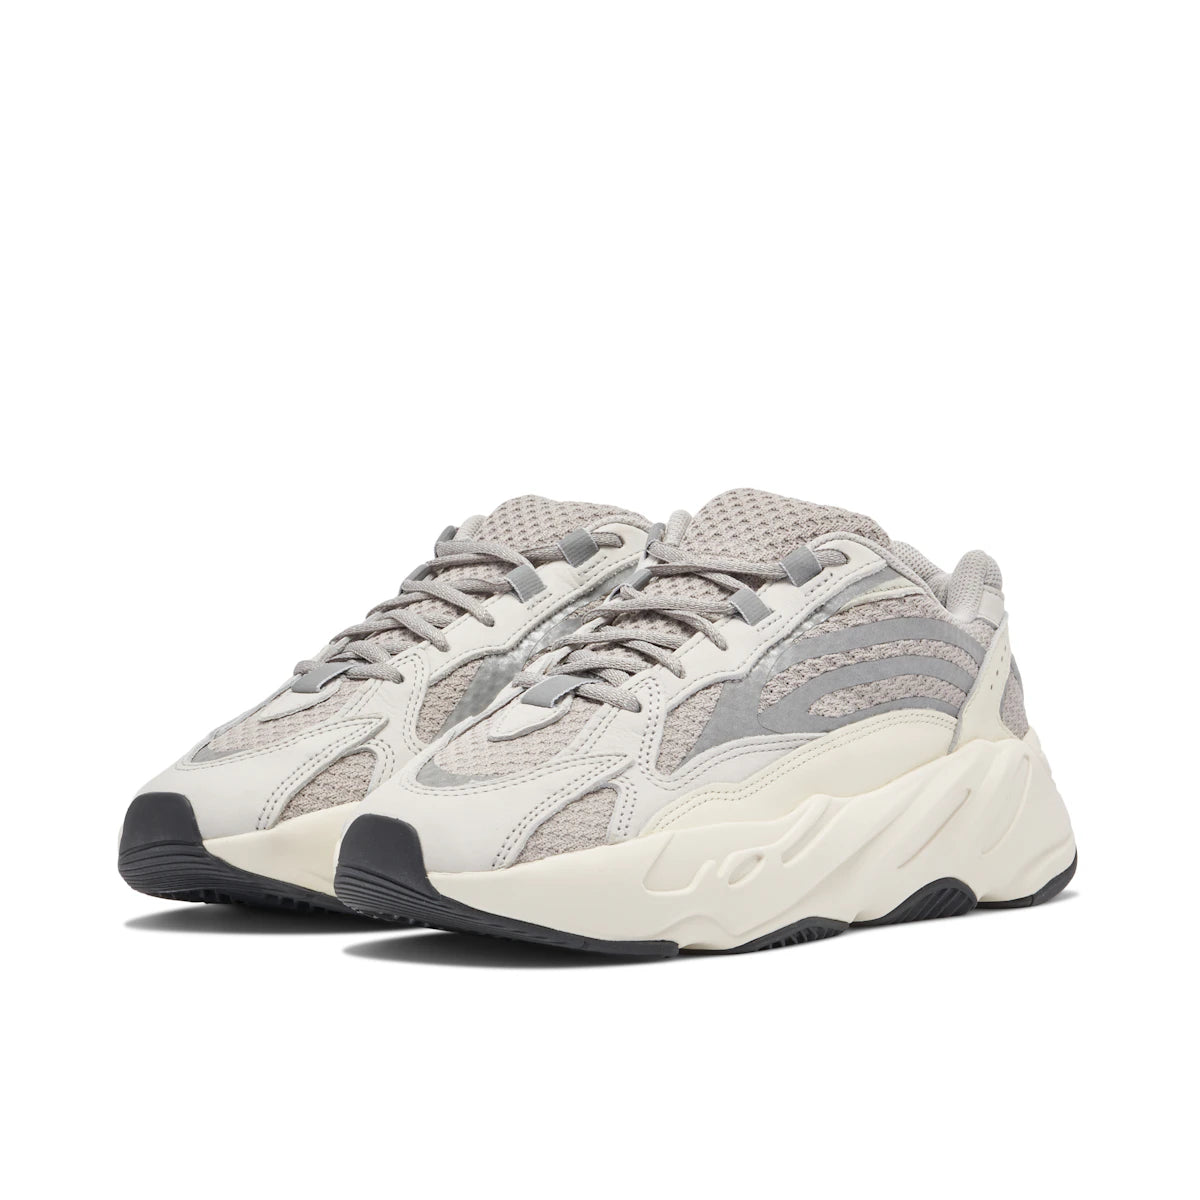 Adidas Yeezy Boost 700 V2 Static by Yeezy from £308.00